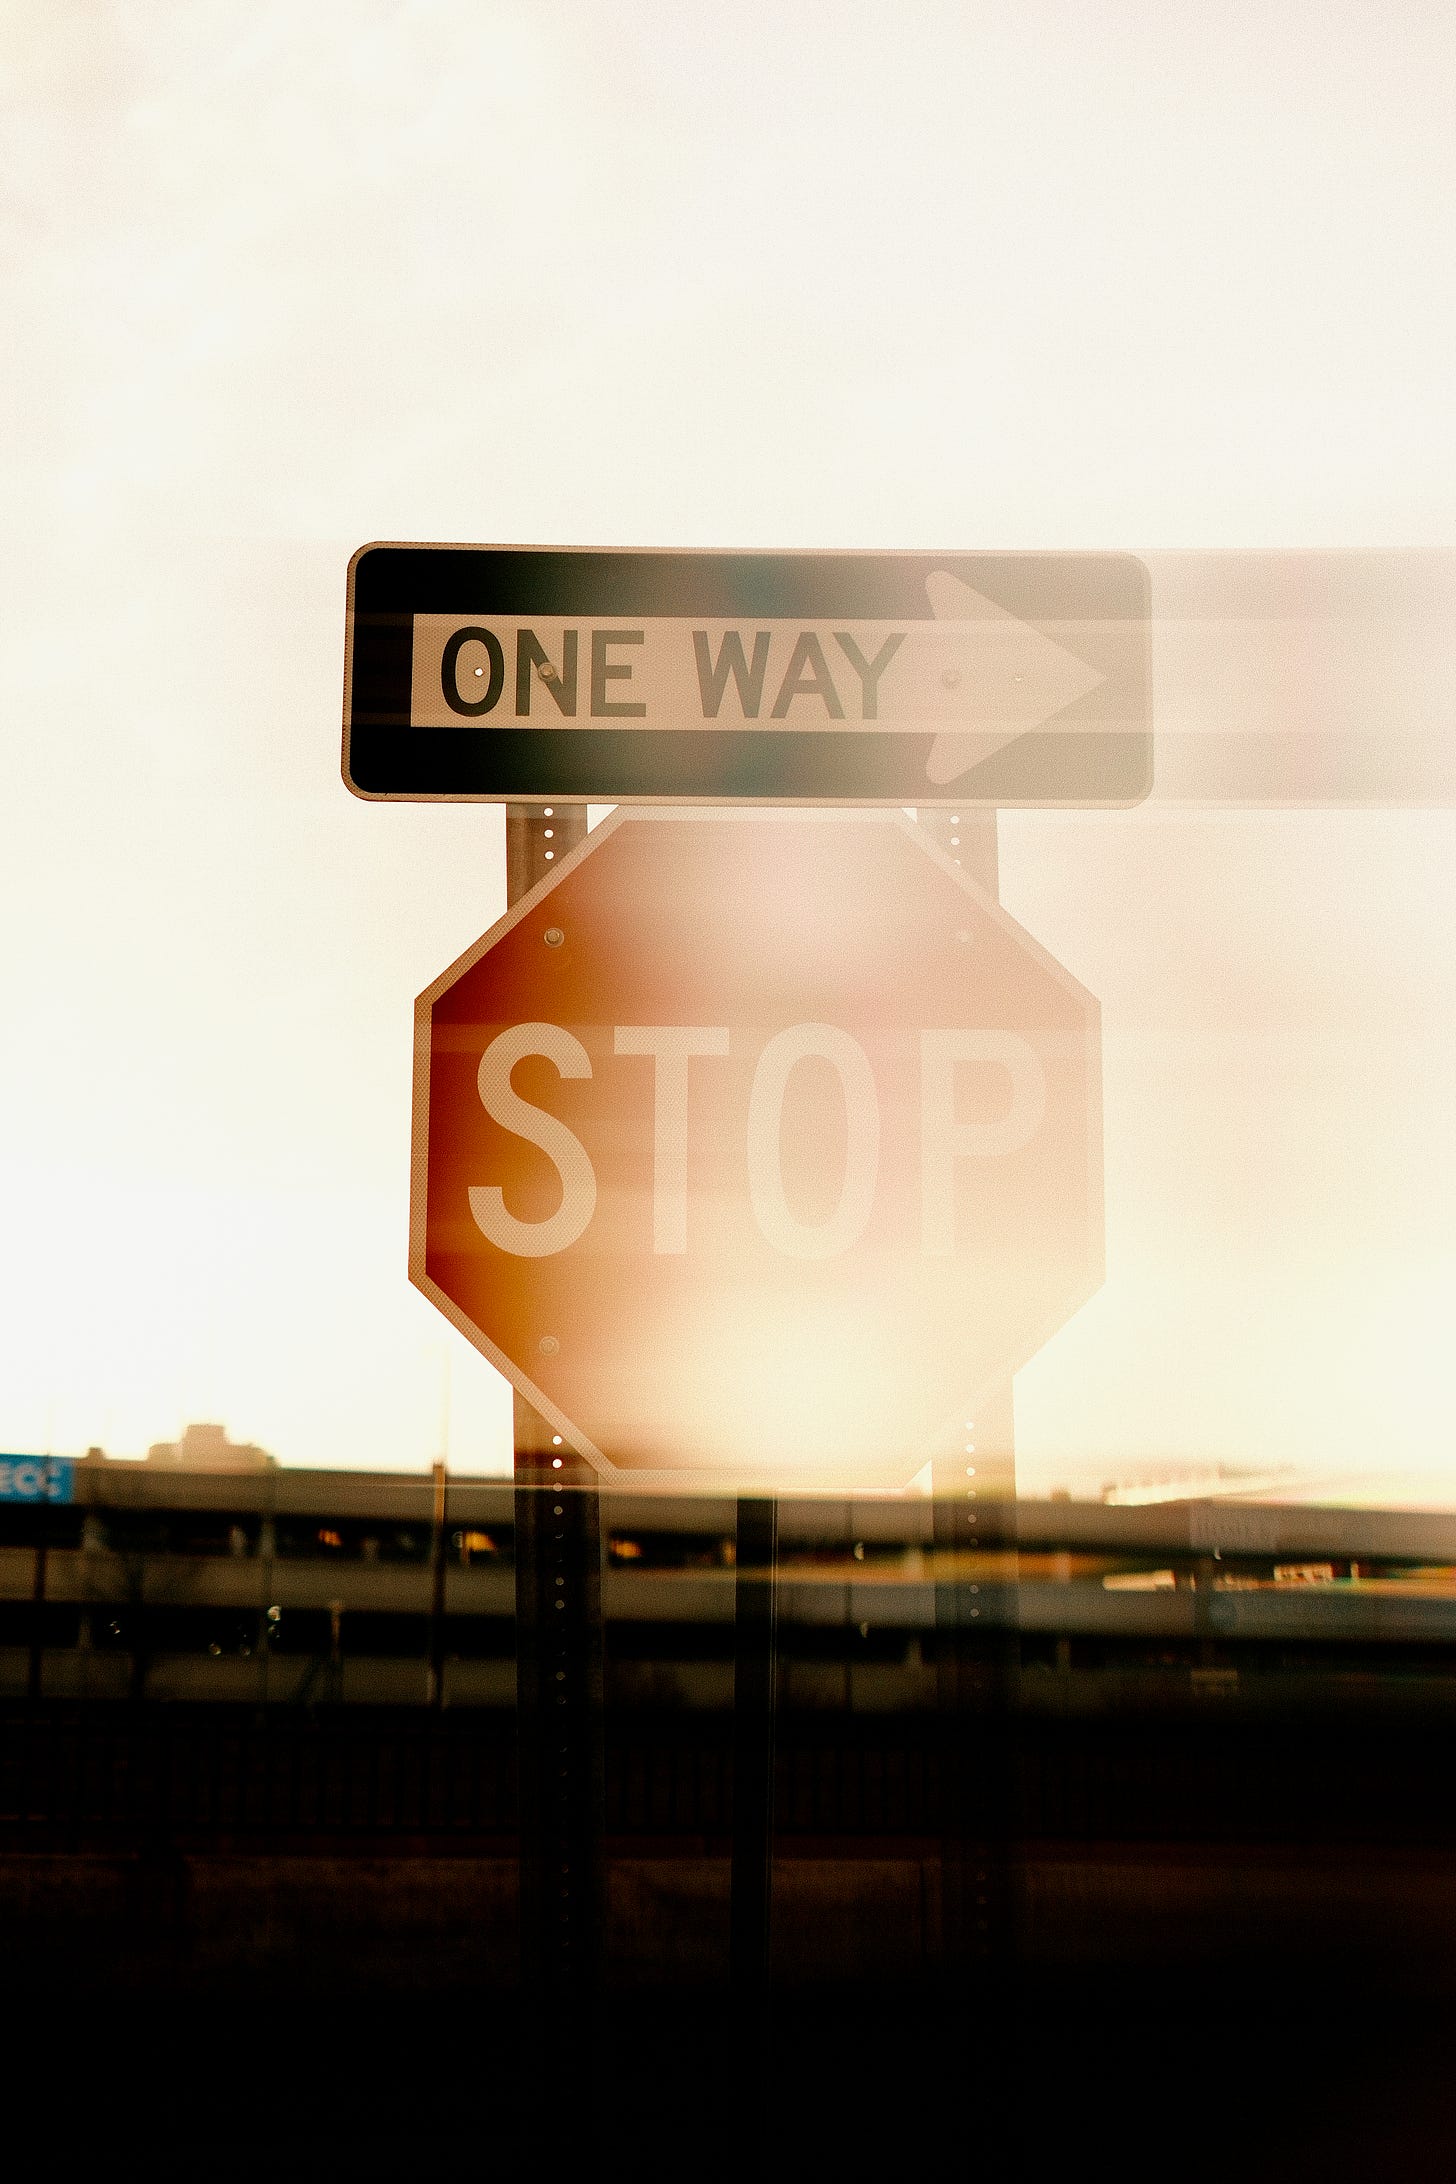 One Way Stop